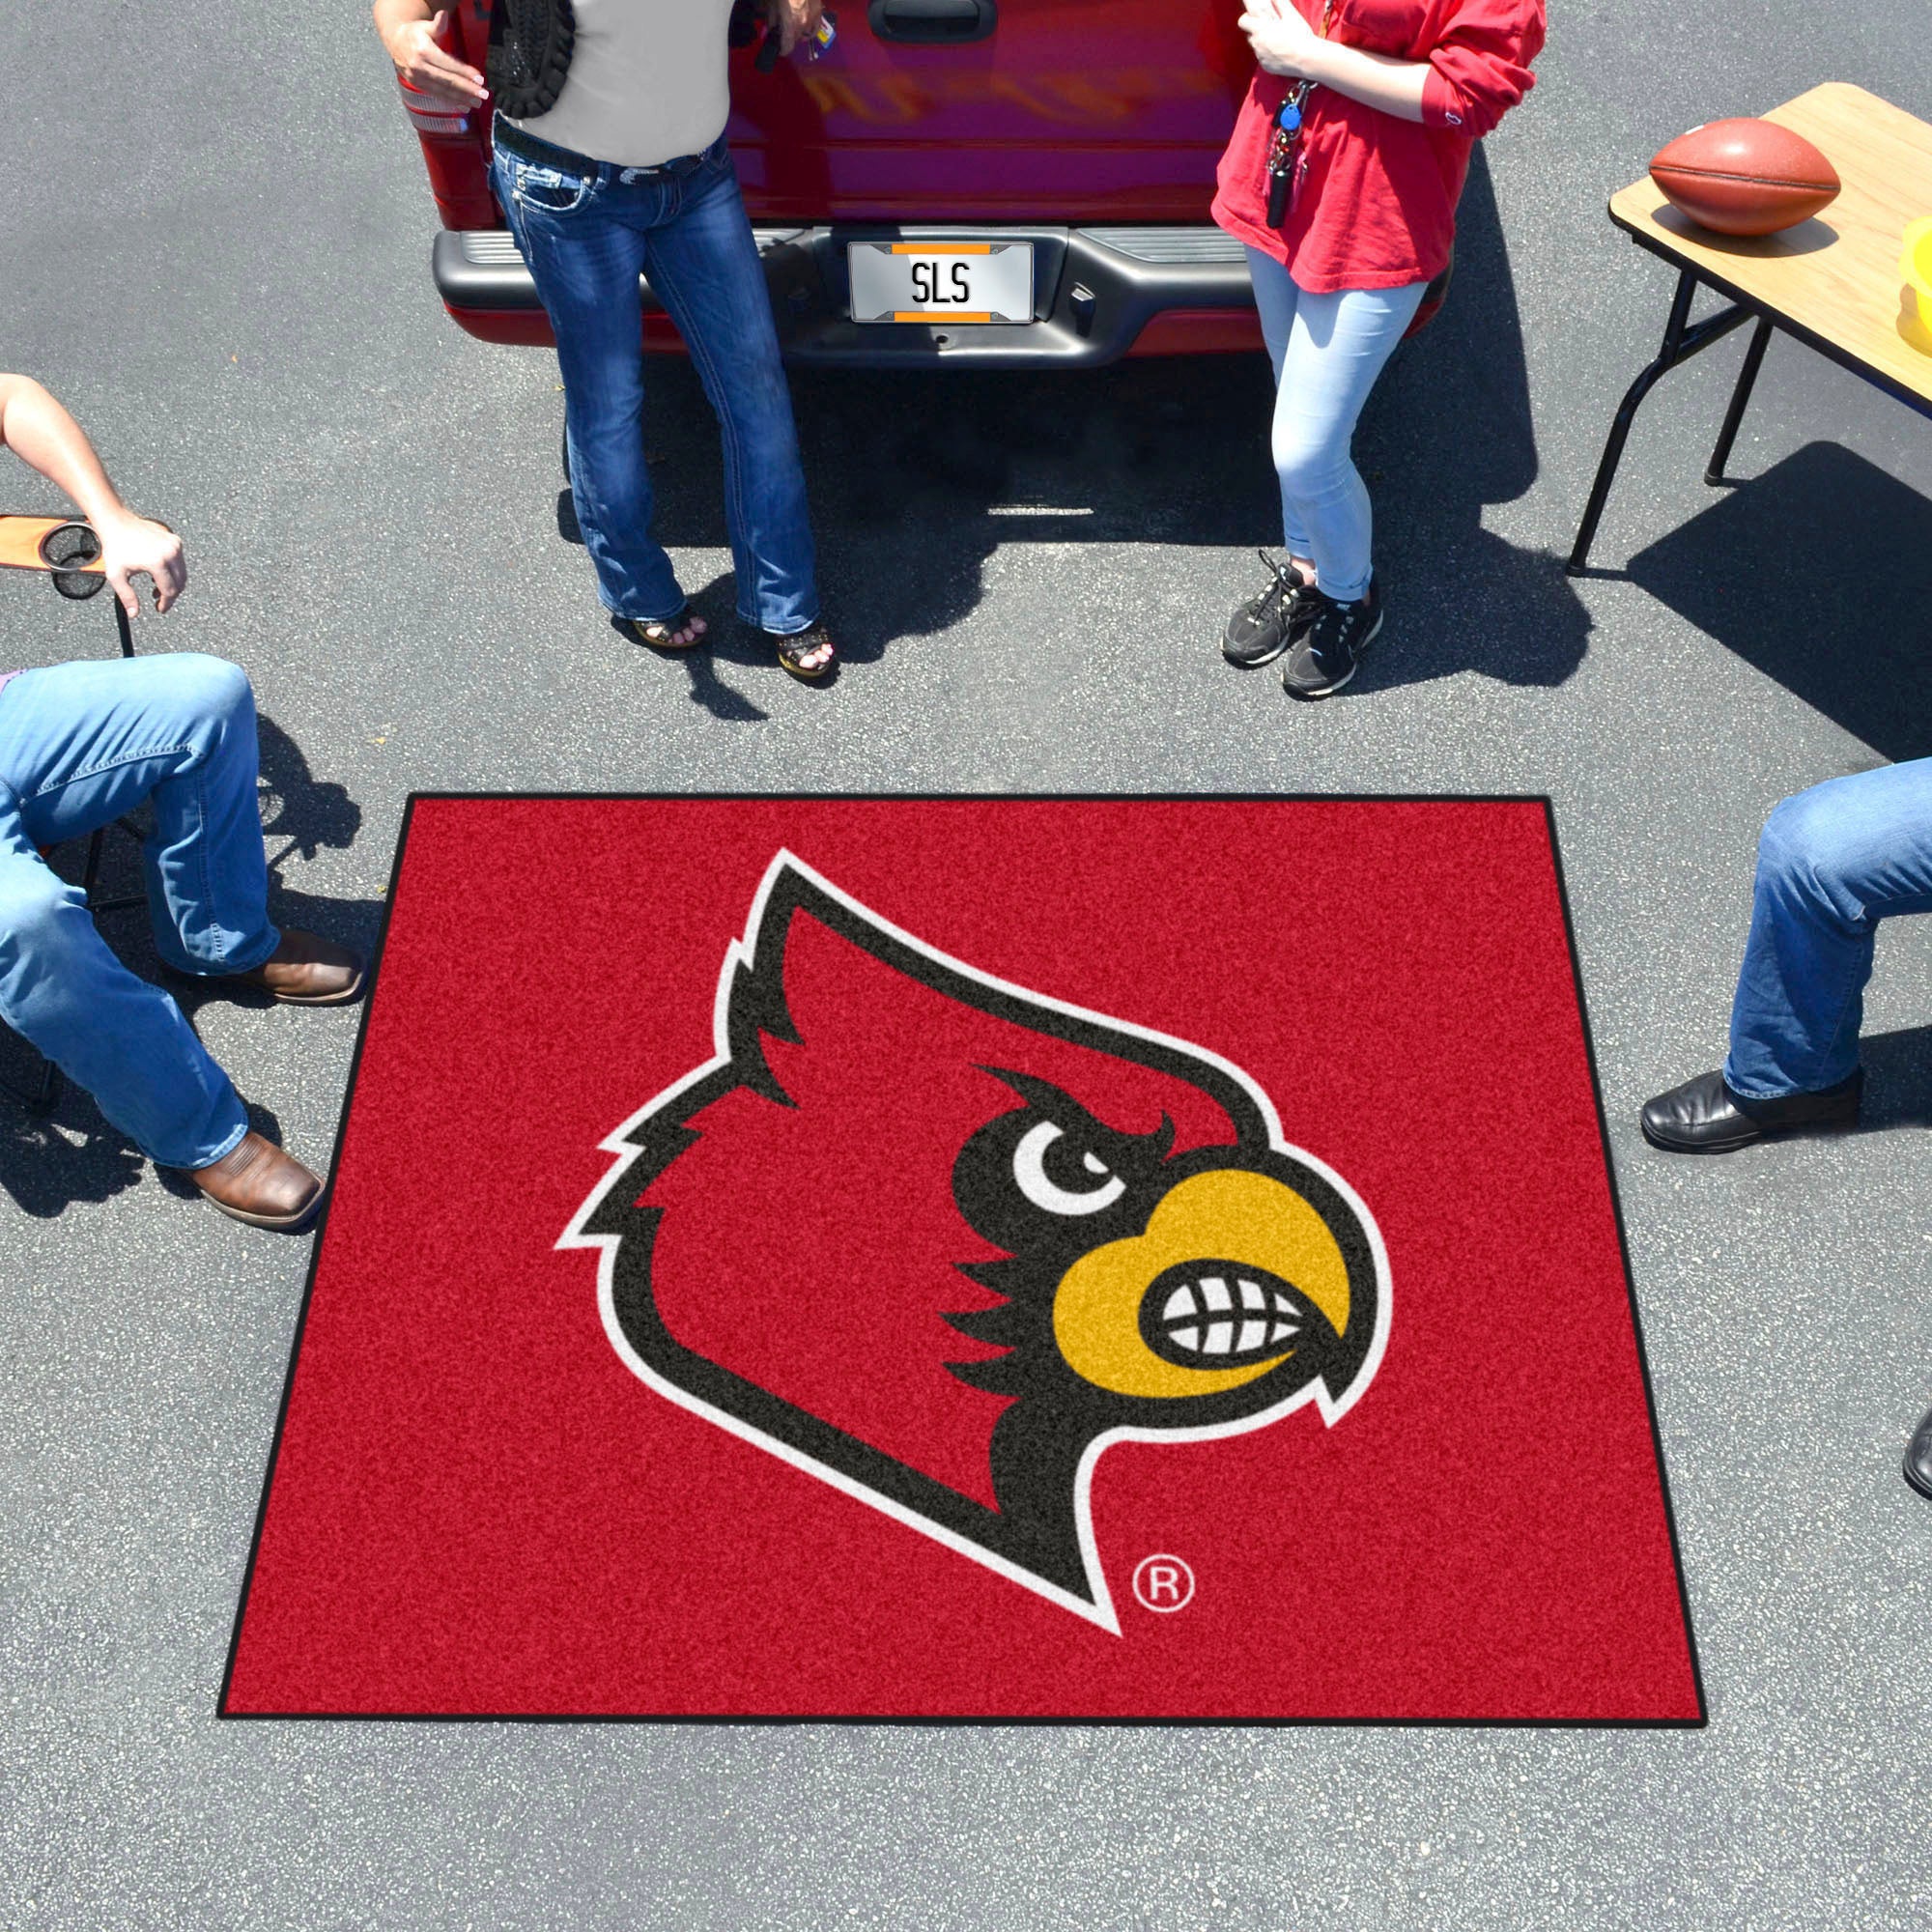 FANMATS 14659 Louisville Cardinals Man Cave UltiMat Rug - 5ft. x 8ft. |  Sports Fan Area Rug, Home Decor Rug and Tailgating Mat